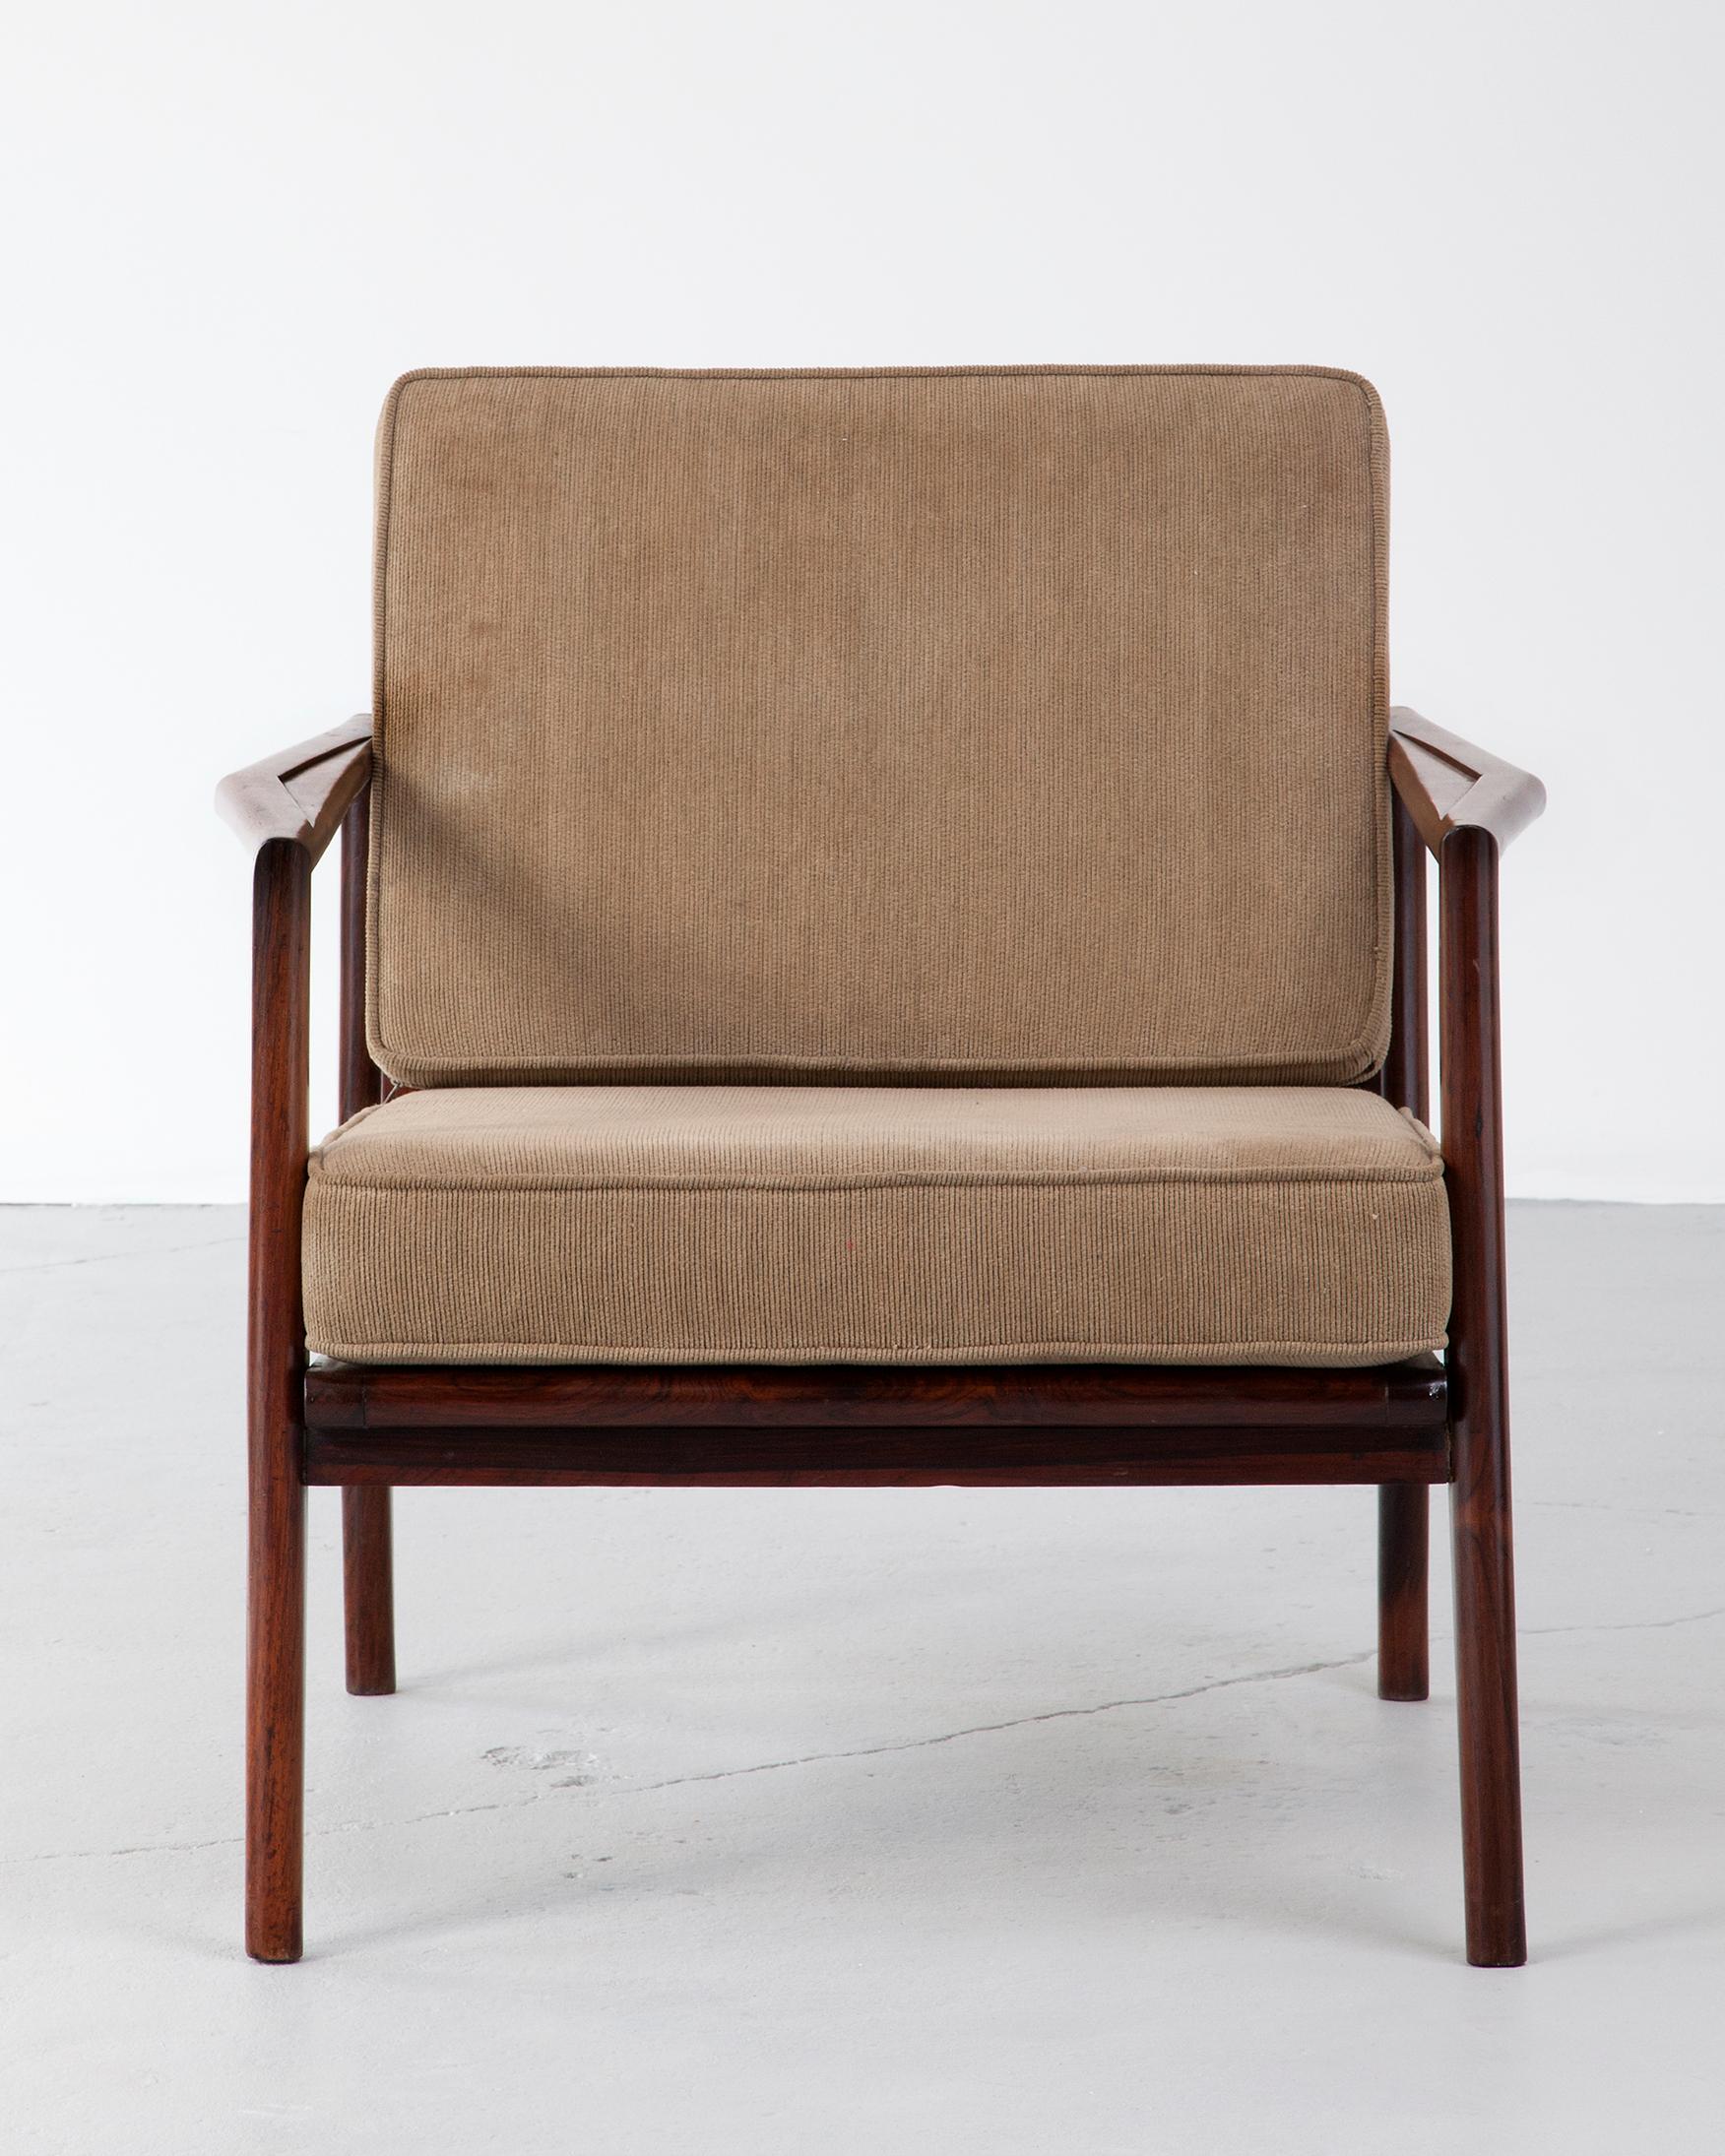 Brazilian Lounge Chair in Rosewood with Beige Upholstery by Fatima, circa 1960